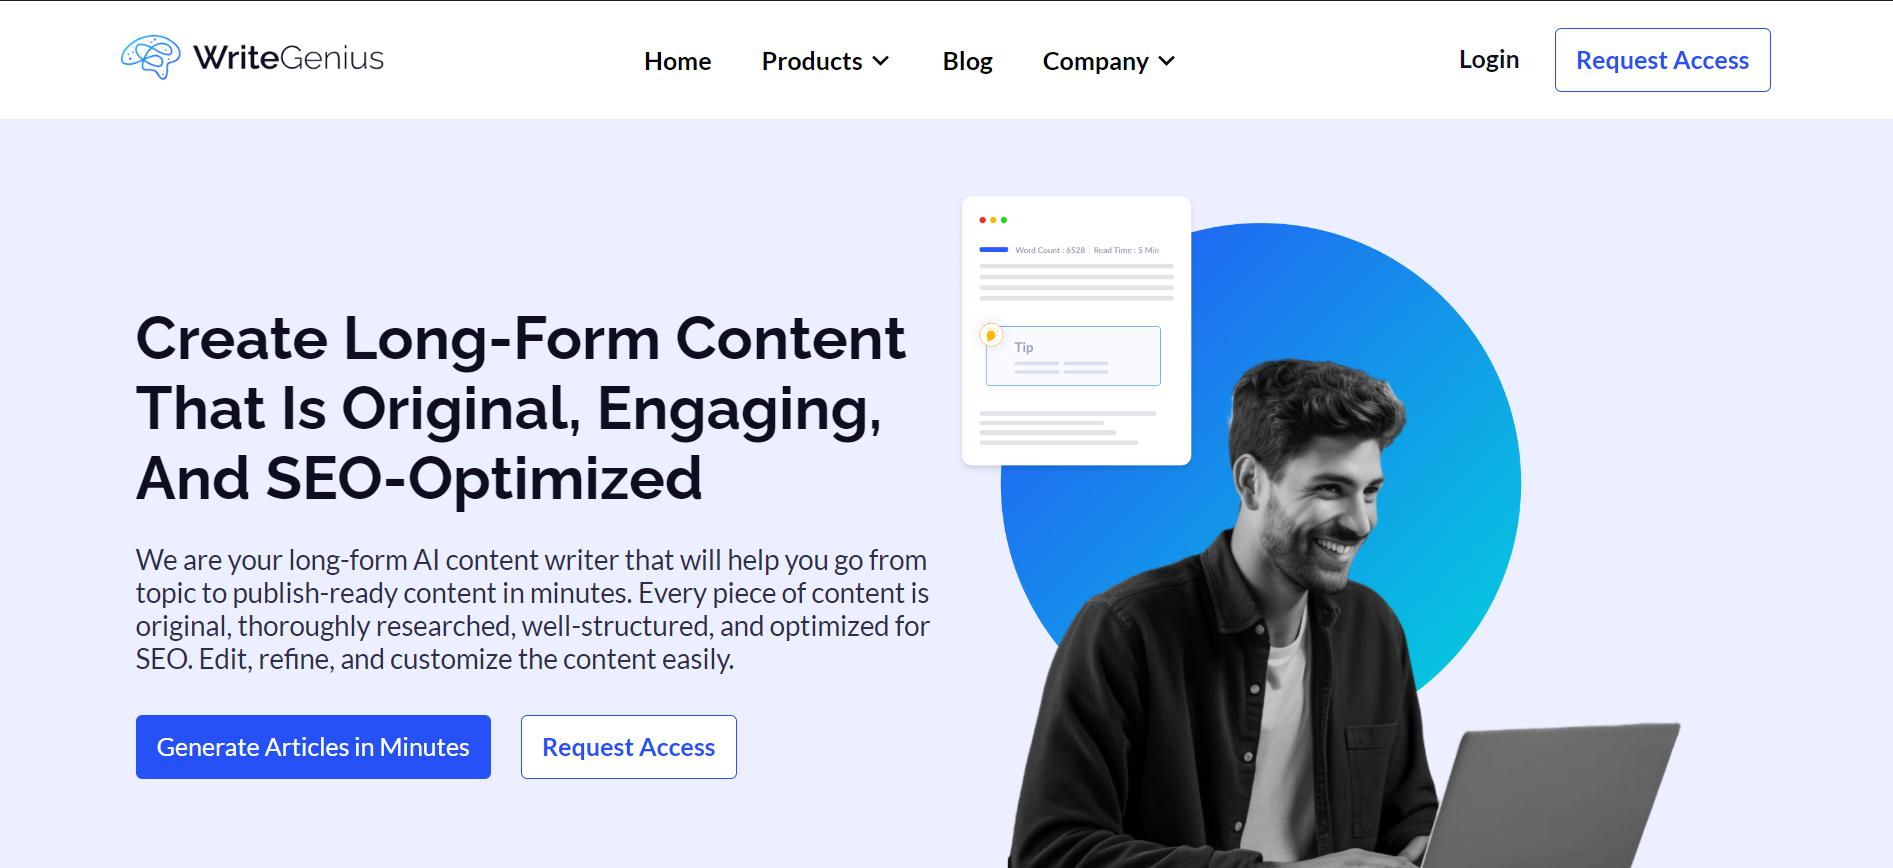 WriteGenius is an innovative AI-powered writing assistant designed for crafting SEO-optimized, engaging long-form content effortlessly. Equipped with a proprietary NLP model, it seamlessly integrates over 150 SEO factors into its content generation.